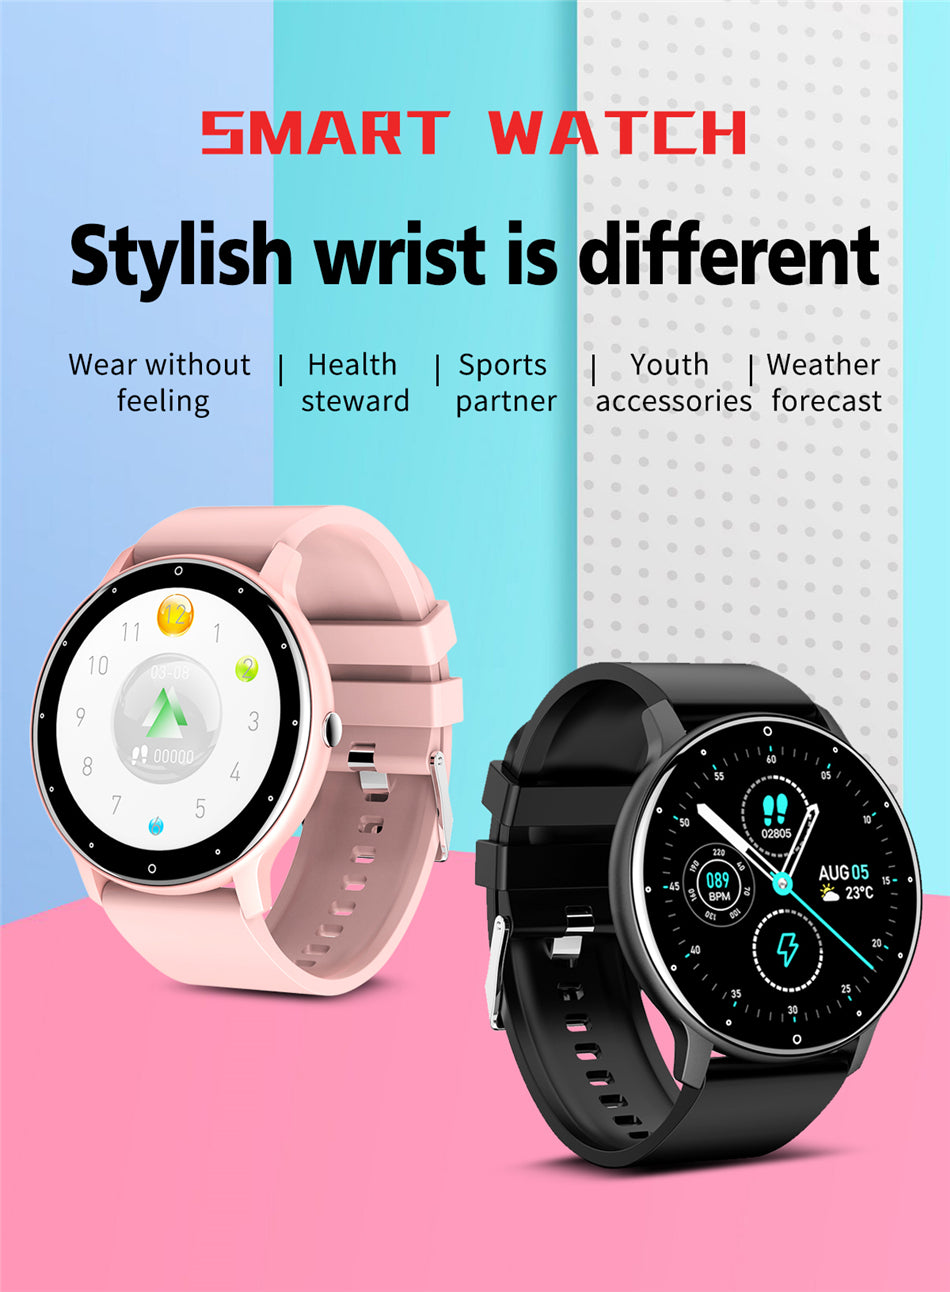 LIGE IP67 Waterproof Men Smart Watch -Full Touch Screen Sport Fitness Bluetooth for iOS or Android